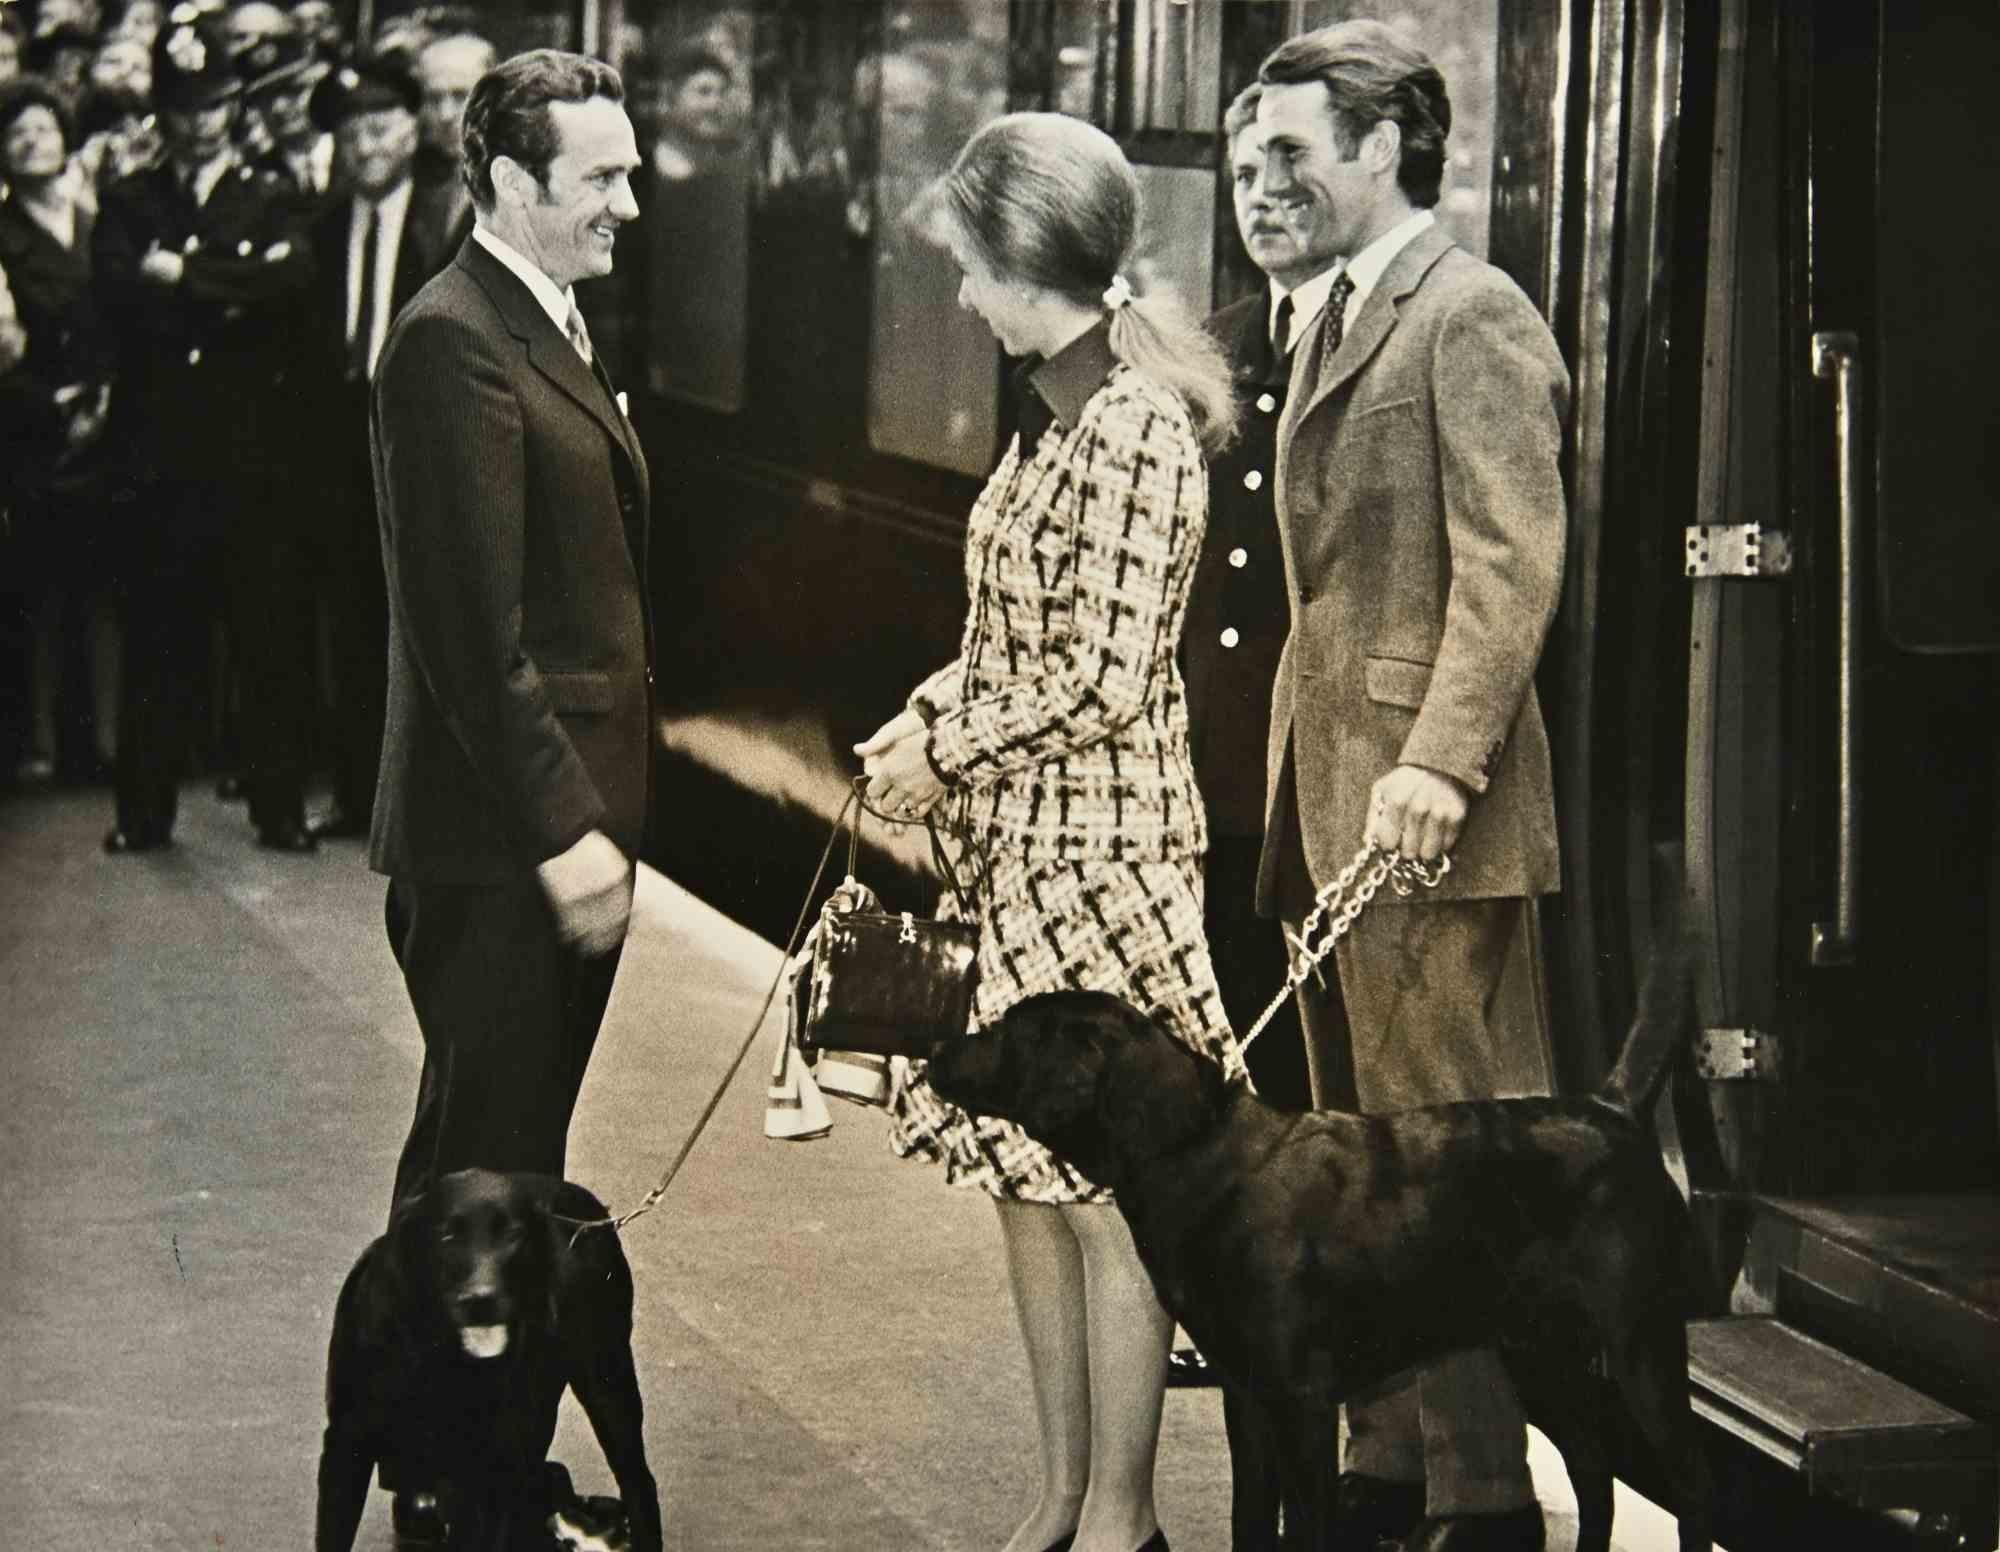 Unknown Figurative Photograph - Lord Snowdon and Princess Margareth - Vintage Photograph - 1970s